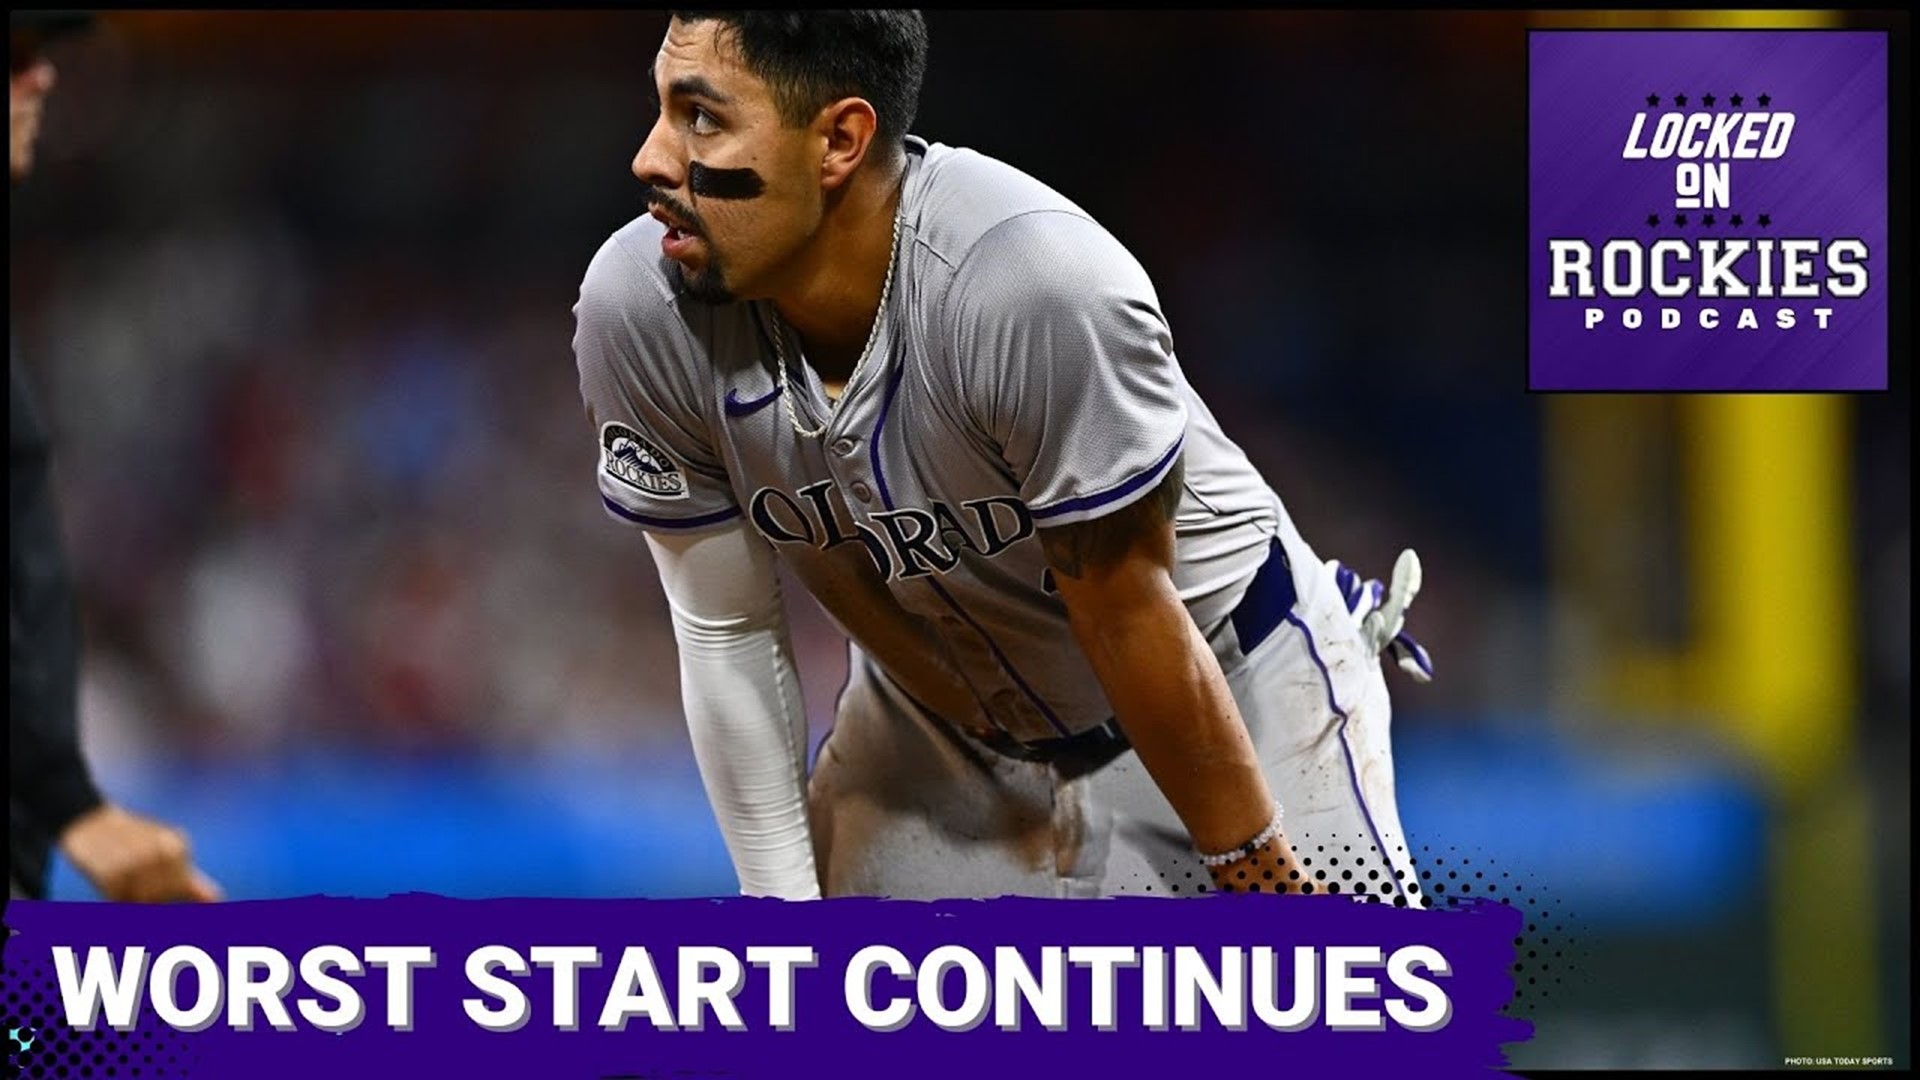 The Rockies have scored 1 run in three games and have struck out 18 times in two games. They are 4-14 and continue to face a daunting schedule.